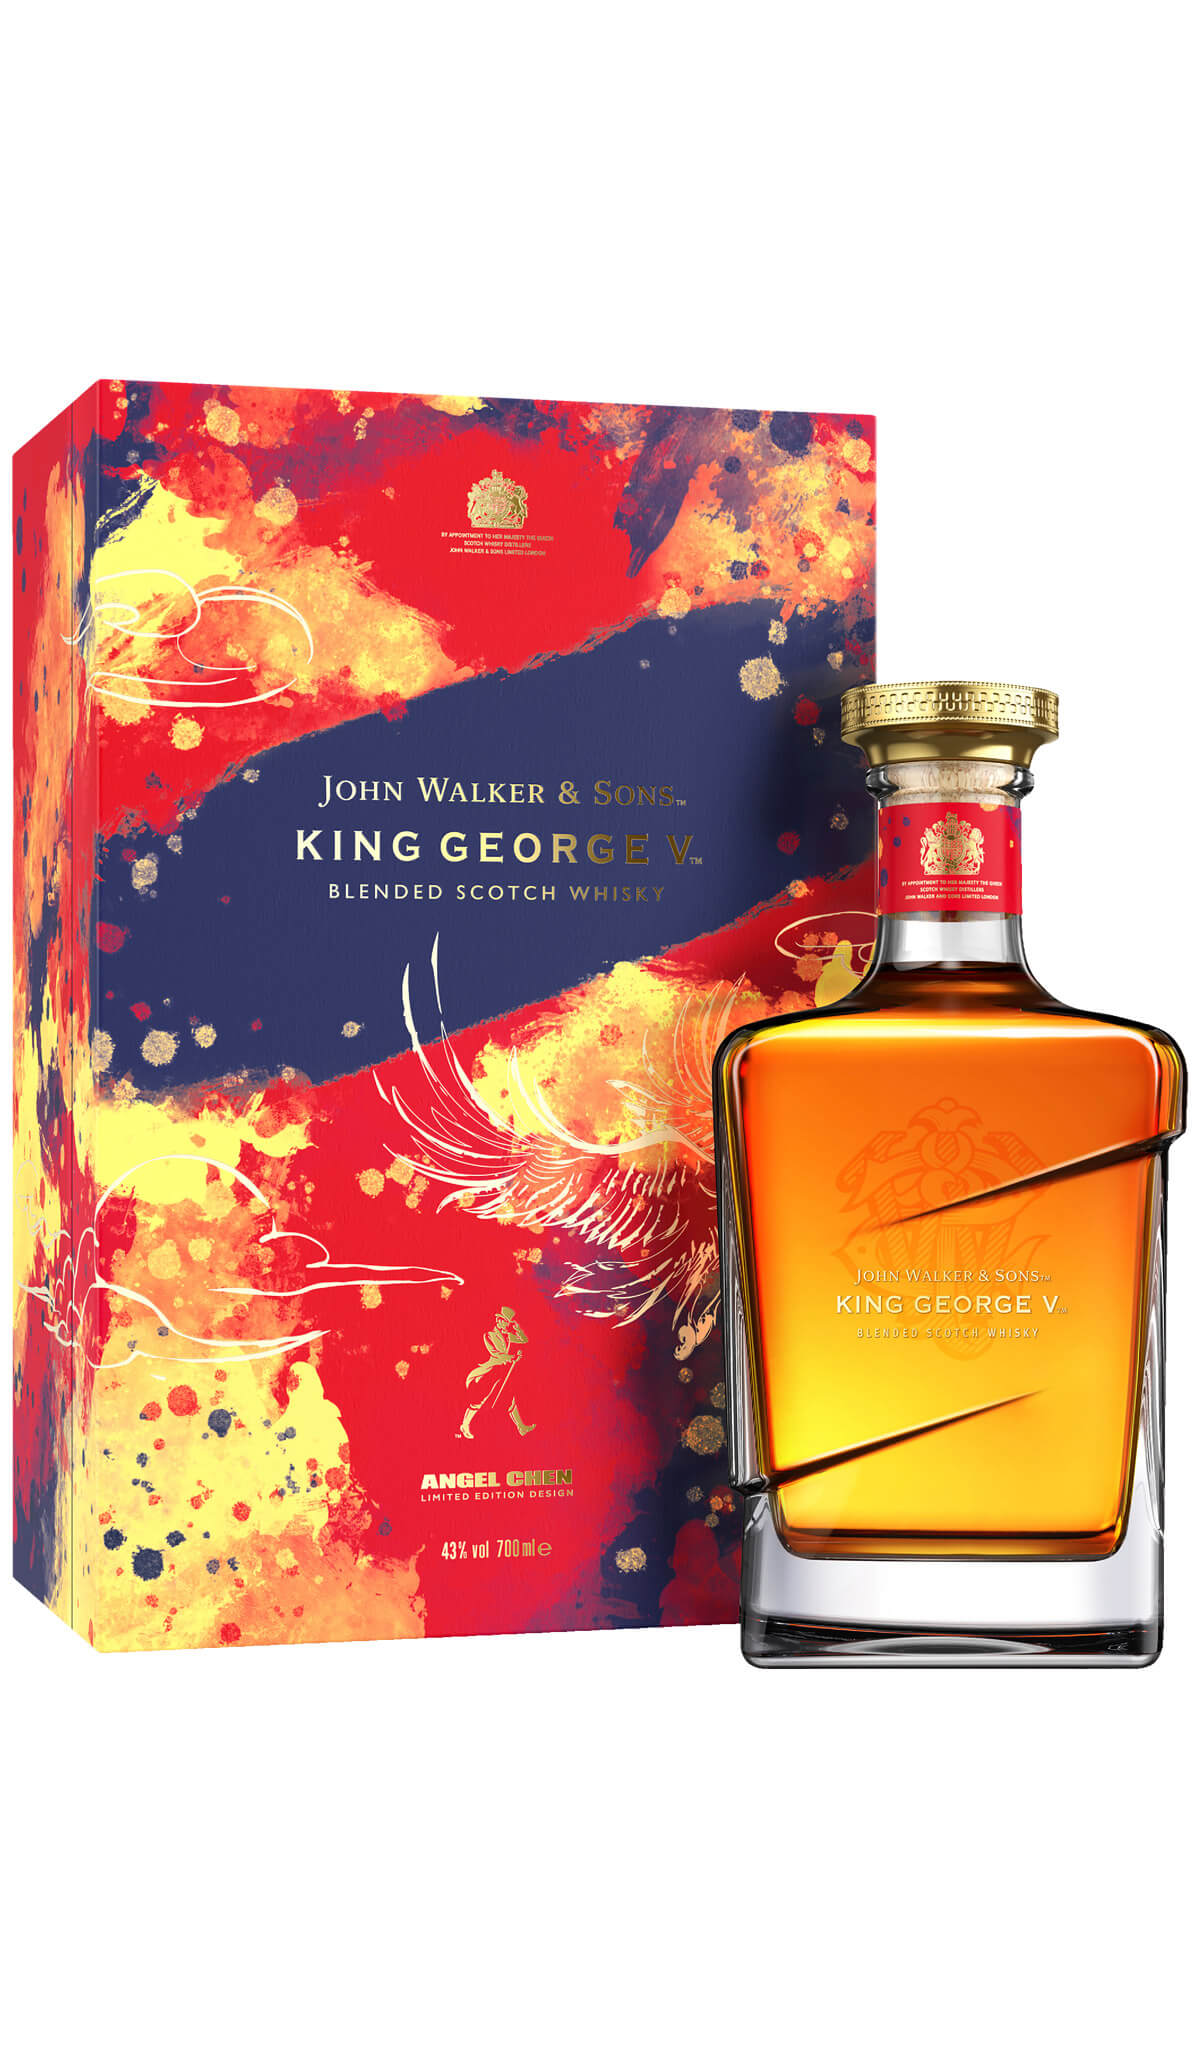 Find out more or buy John Walker & Sons King George V Limited Edition Lunar 750ml online at Wine Sellers Direct - Australia’s independent liquor specialists.